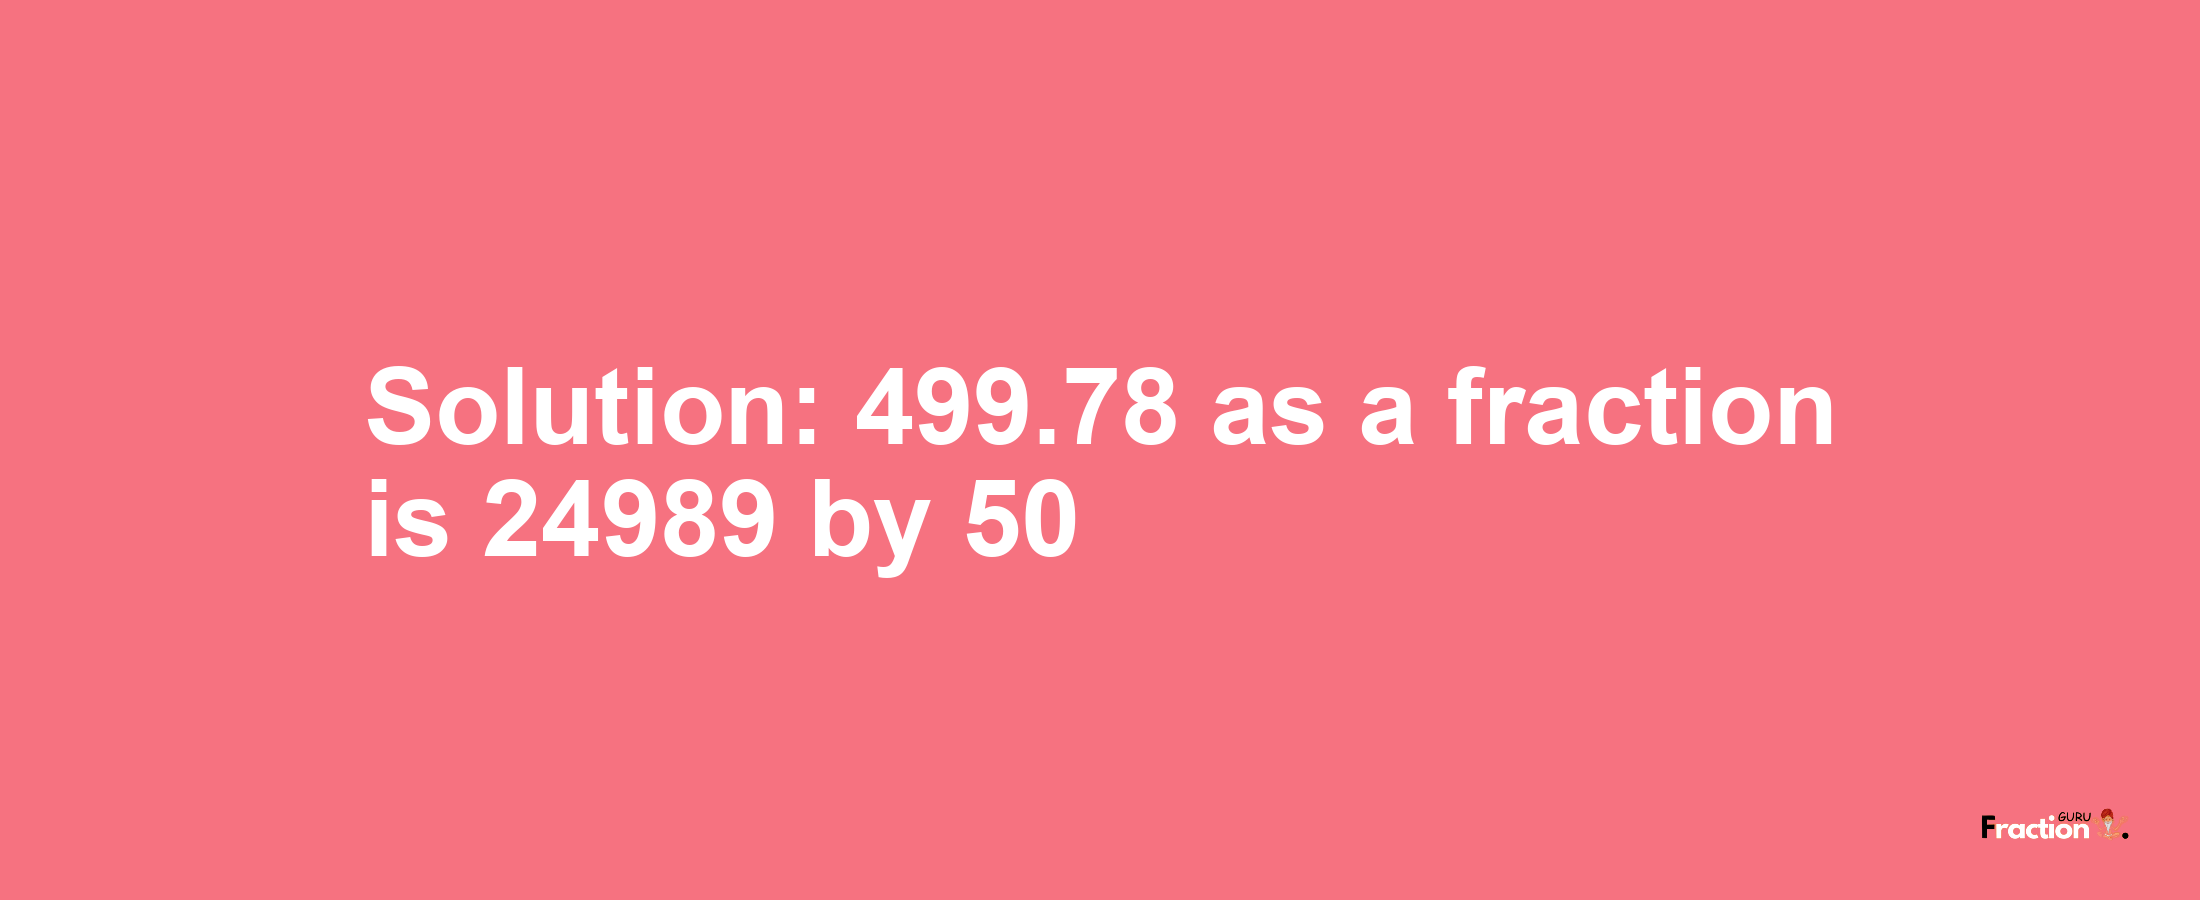 Solution:499.78 as a fraction is 24989/50